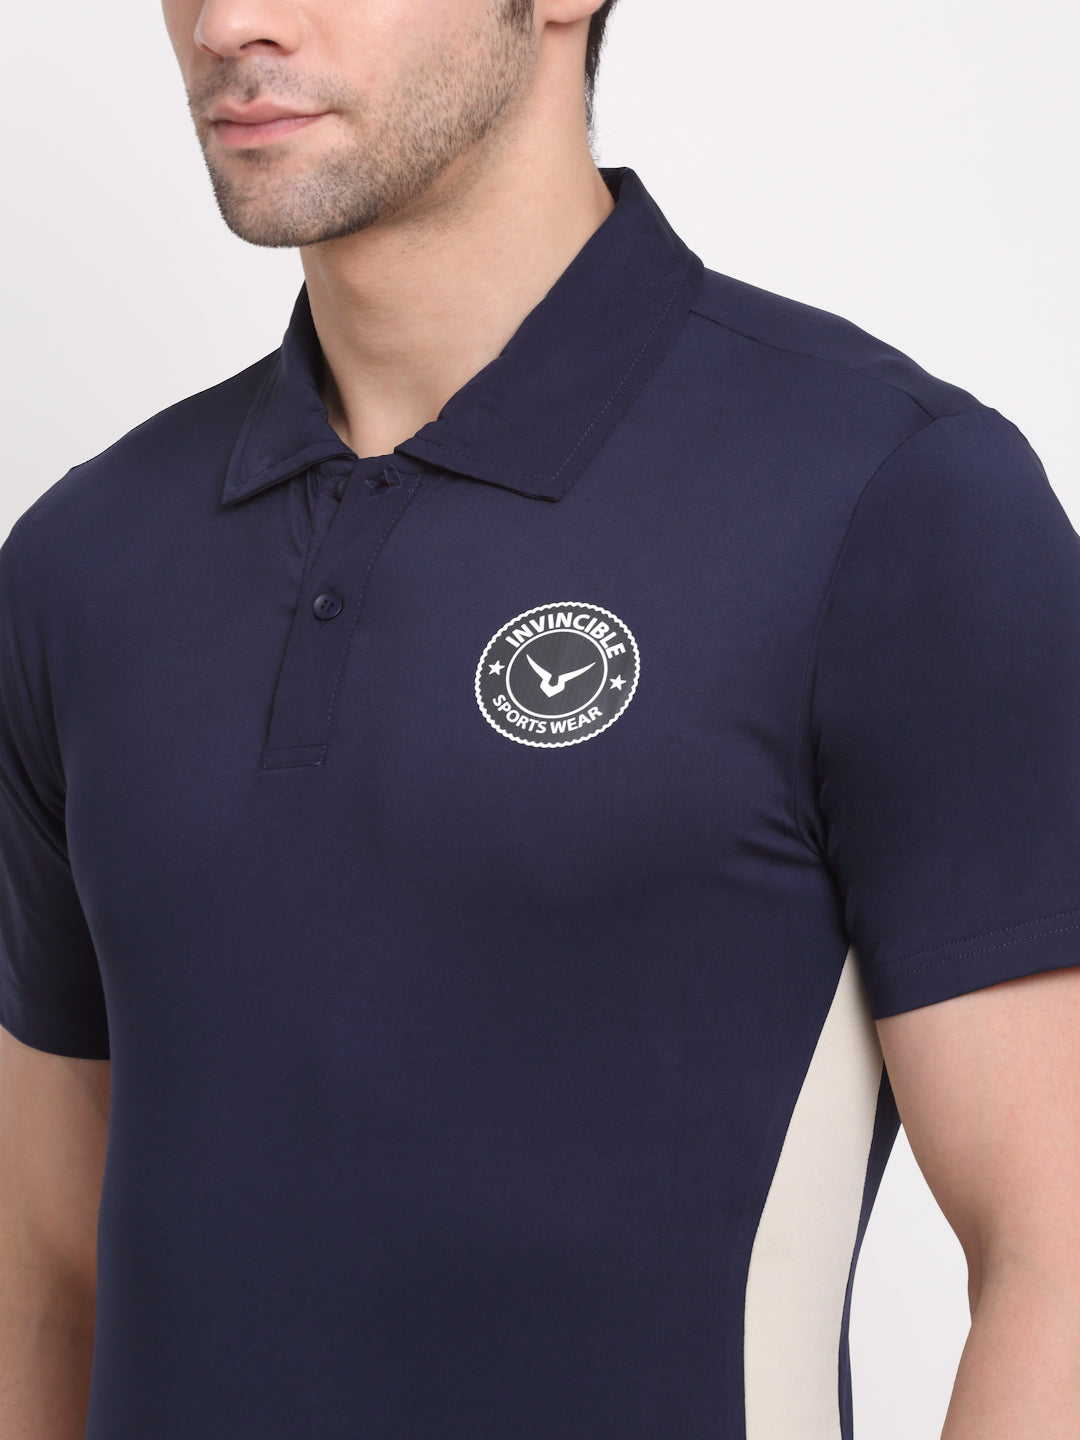 Invincible Men’s Color Block Polo With Side Panel